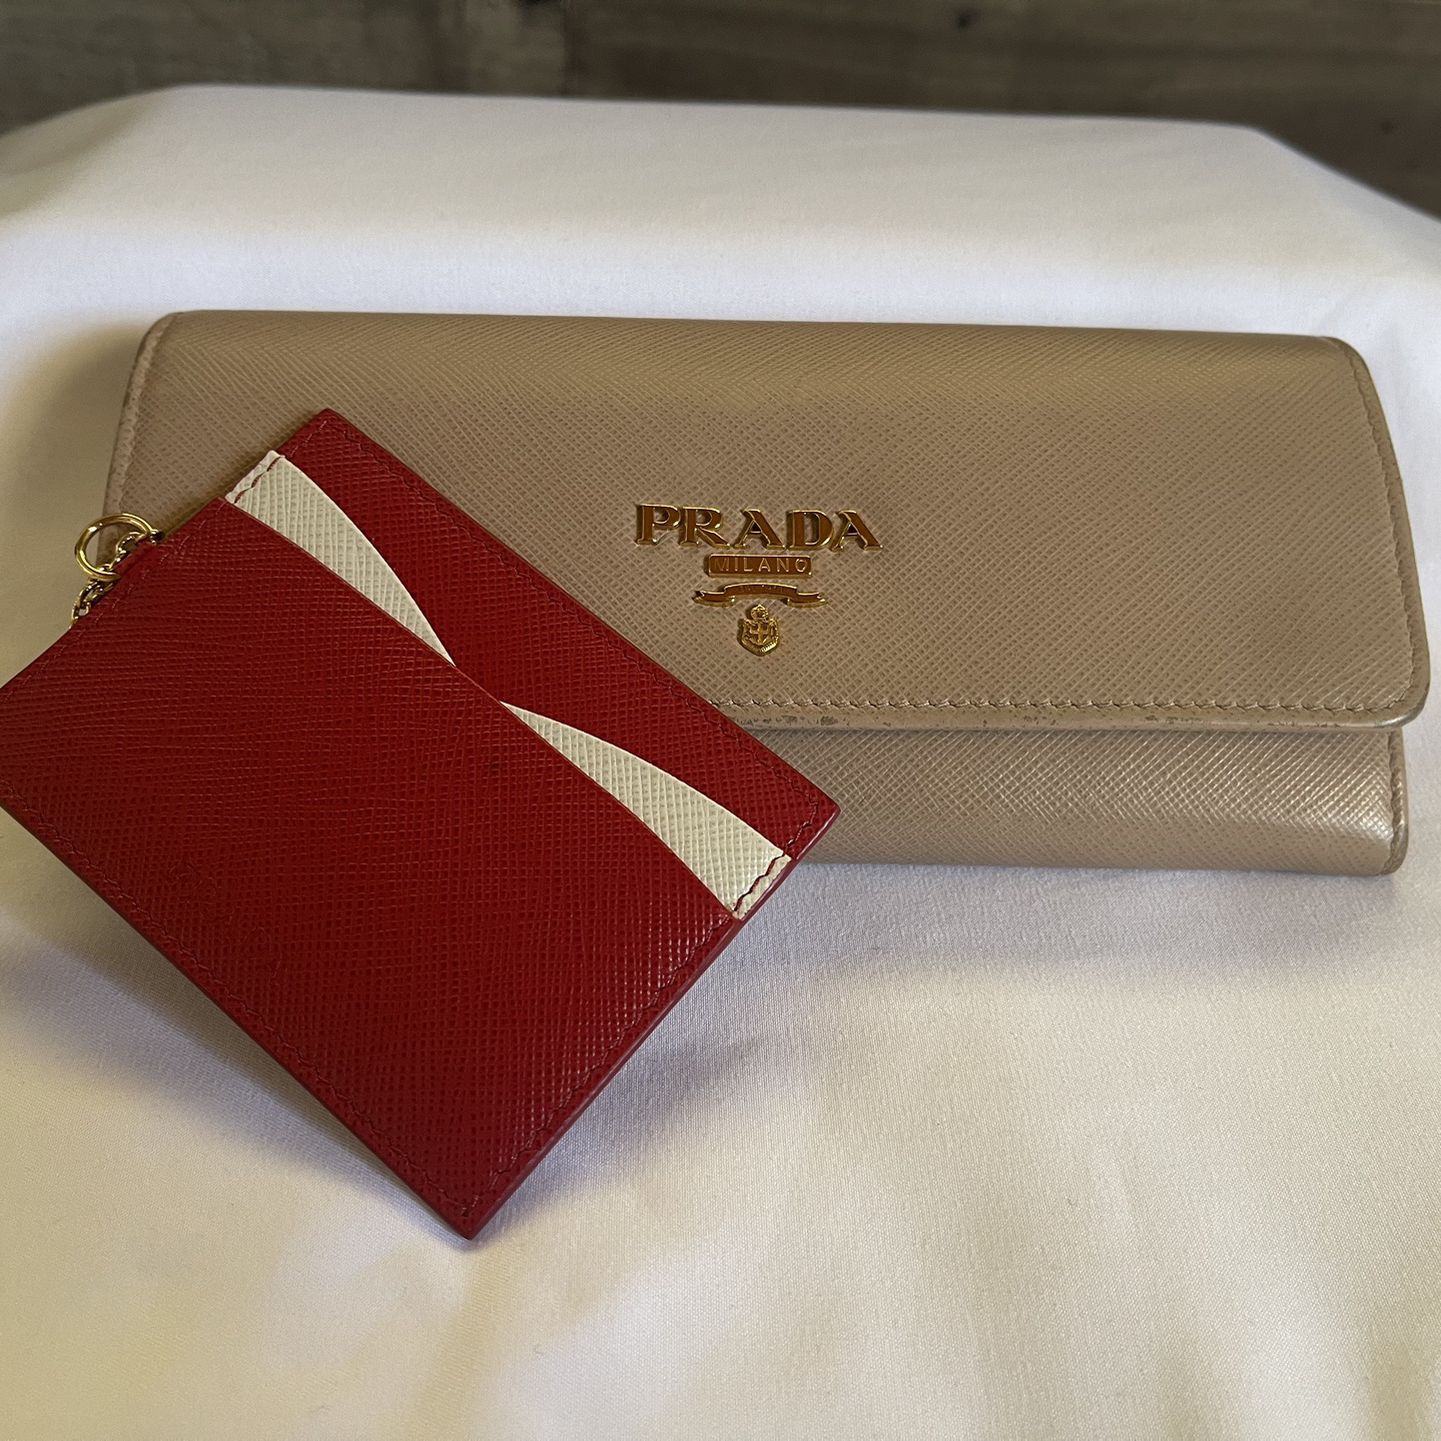 Powder Pink/fiery Red Large Saffiano Leather Wallet